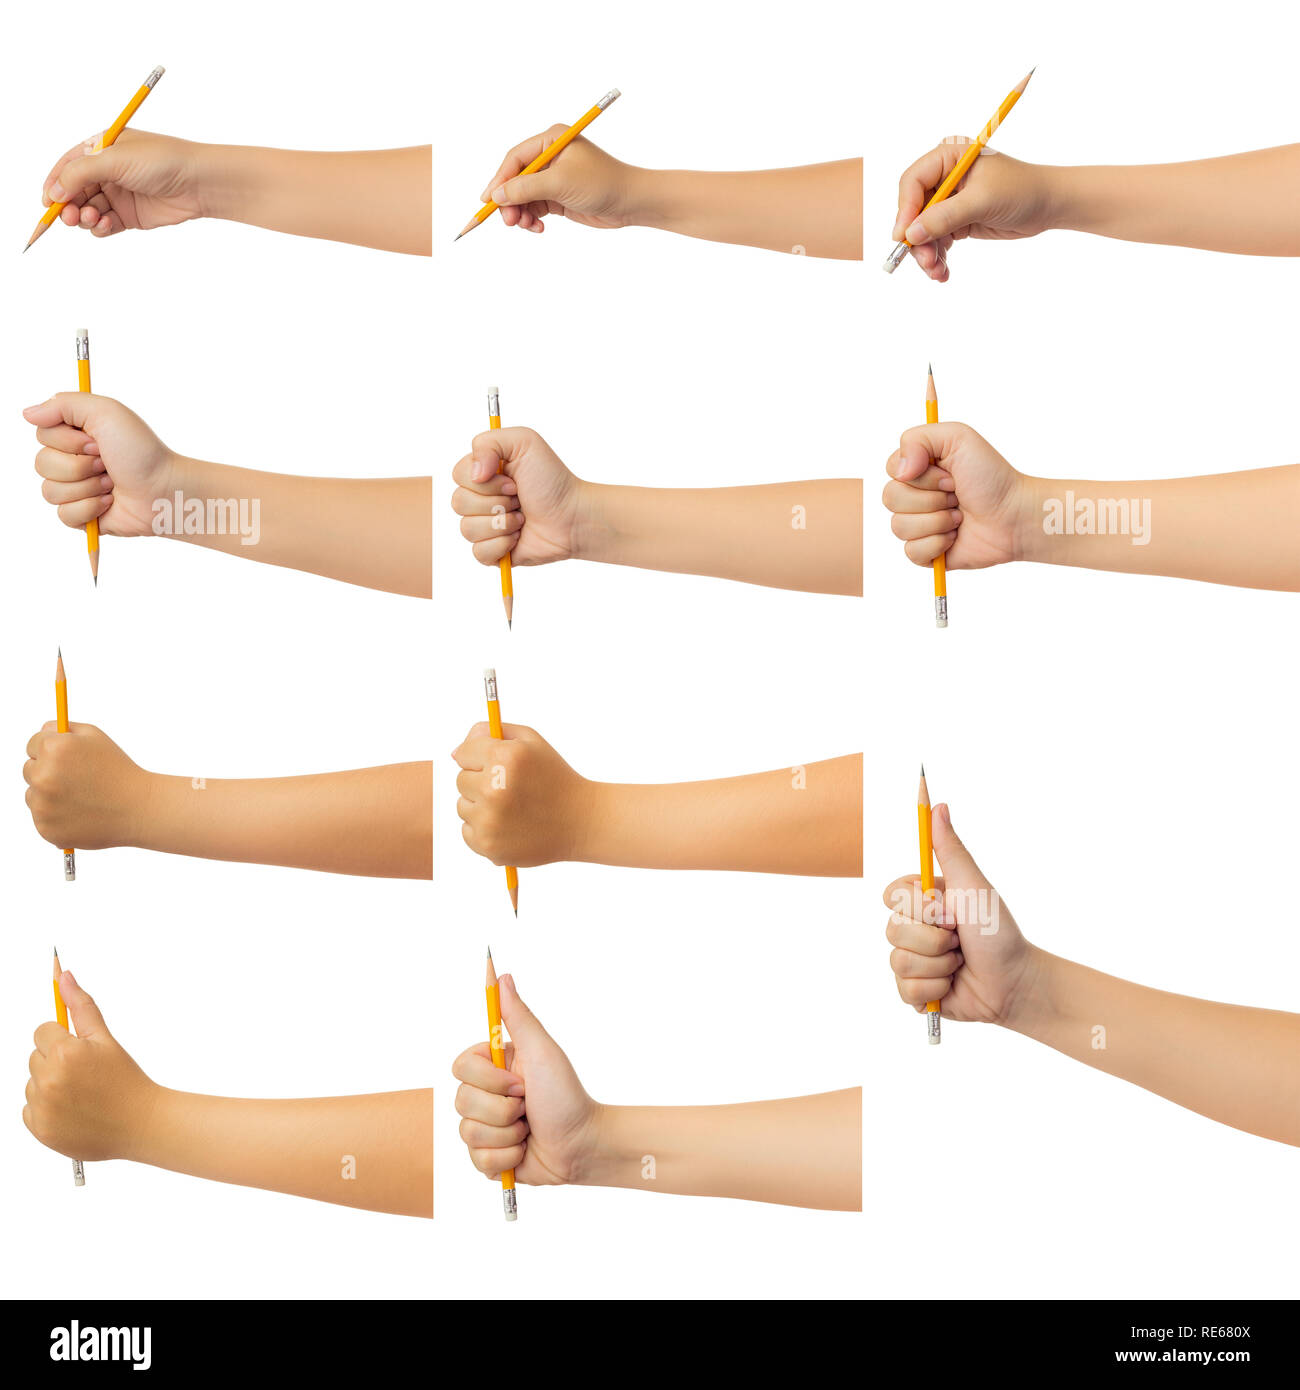 Set Of Human Hand In Reach Out One S Hand And Writing Drawing Sketching Or Holding With Pencil Gesture Isolate On White Background With Clipping Pat Stock Photo Alamy